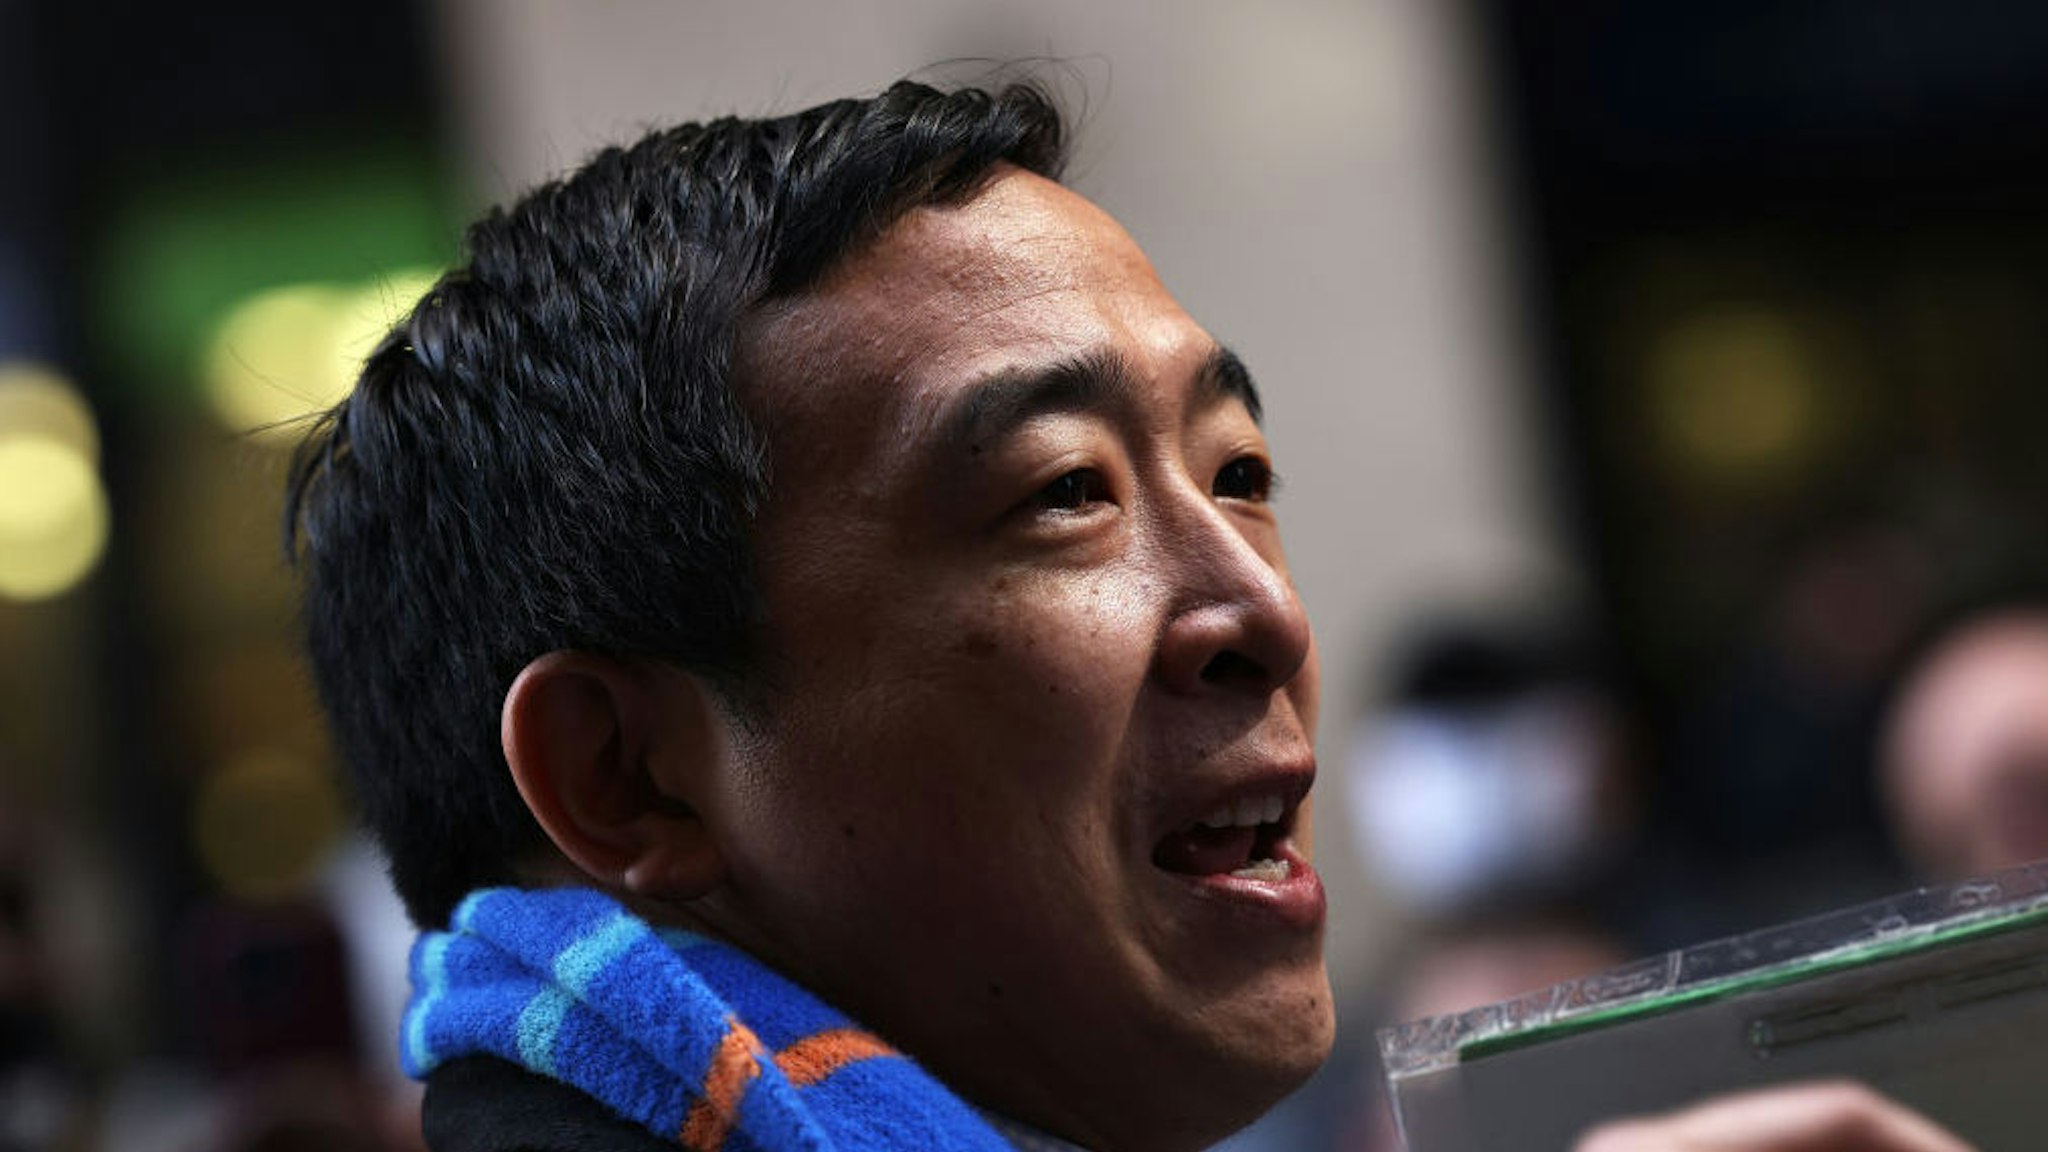 NEW YORK, NEW YORK - MARCH 23: New York City mayoral candidate Andrew Yang speaks outside the NYC Board of Elections office on March 23, 2021 in New York City. Yang dropped off the signatures needed to officially have his name on the ballot for the mayoral race. His campaign says they collected over 9,000 signatures gathered by volunteers to secure his name on the ballot.